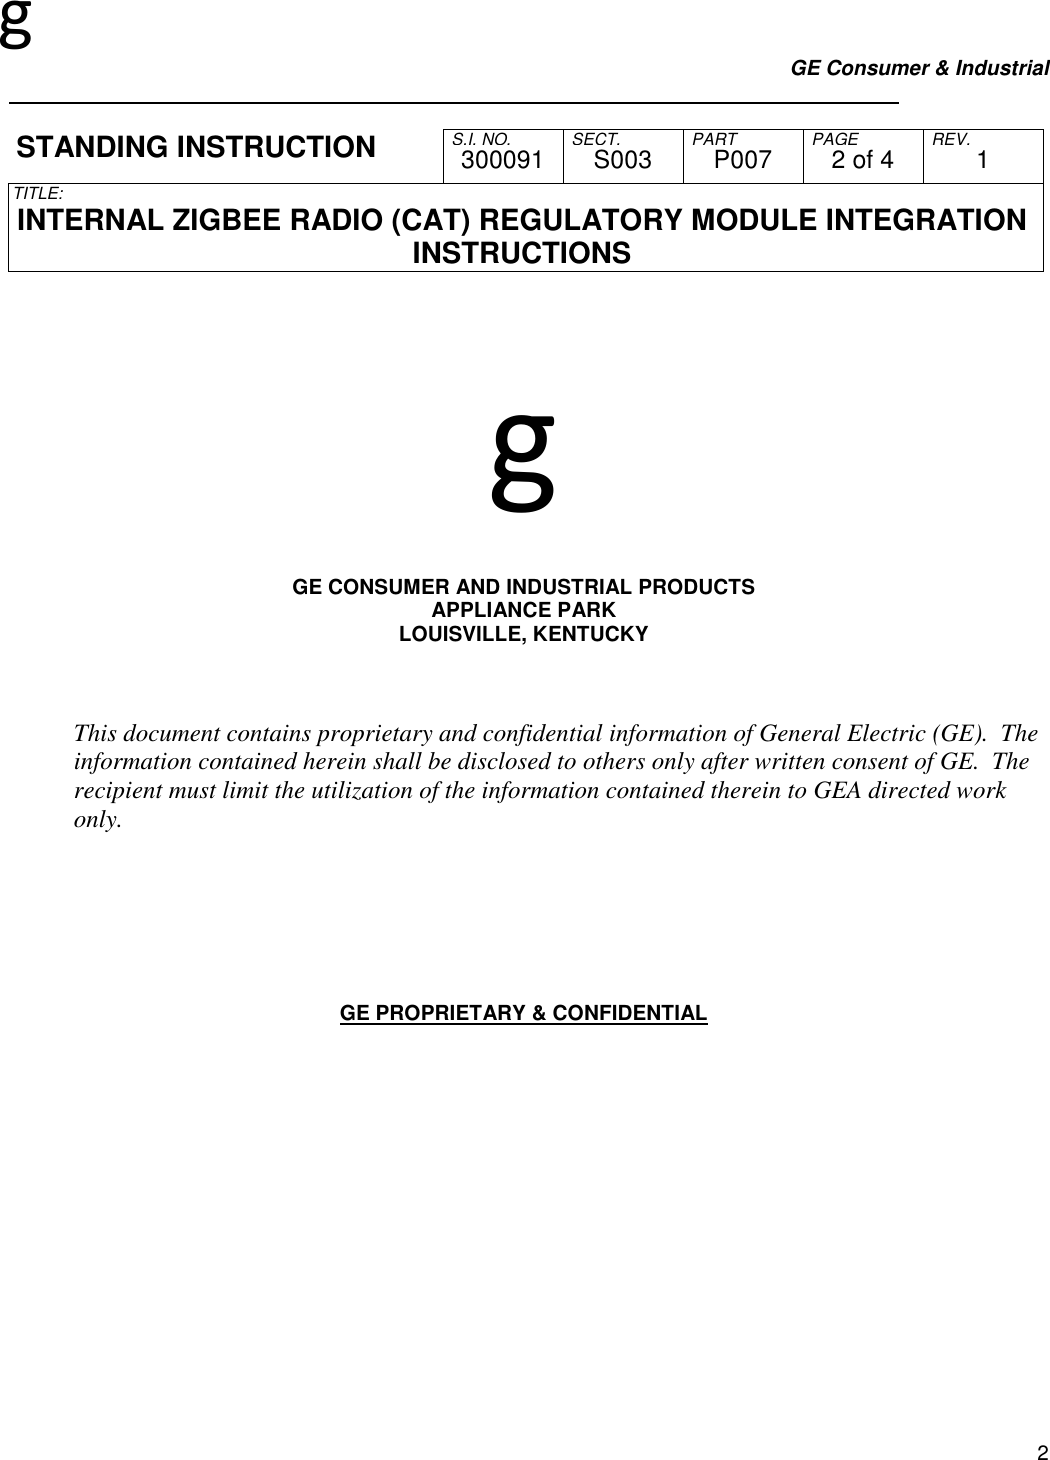 g GE Consumer &amp; Industrial     S.I. NO. SECT. PART PAGE REV. STANDING INSTRUCTION  300091  S003  P007  2 of 4  1 TITLE:  INTERNAL ZIGBEE RADIO (CAT) REGULATORY MODULE INTEGRATION INSTRUCTIONS   2   g   GE CONSUMER AND INDUSTRIAL PRODUCTS APPLIANCE PARK LOUISVILLE, KENTUCKY    This document contains proprietary and confidential information of General Electric (GE).  The information contained herein shall be disclosed to others only after written consent of GE.  The recipient must limit the utilization of the information contained therein to GEA directed work only.        GE PROPRIETARY &amp; CONFIDENTIAL           